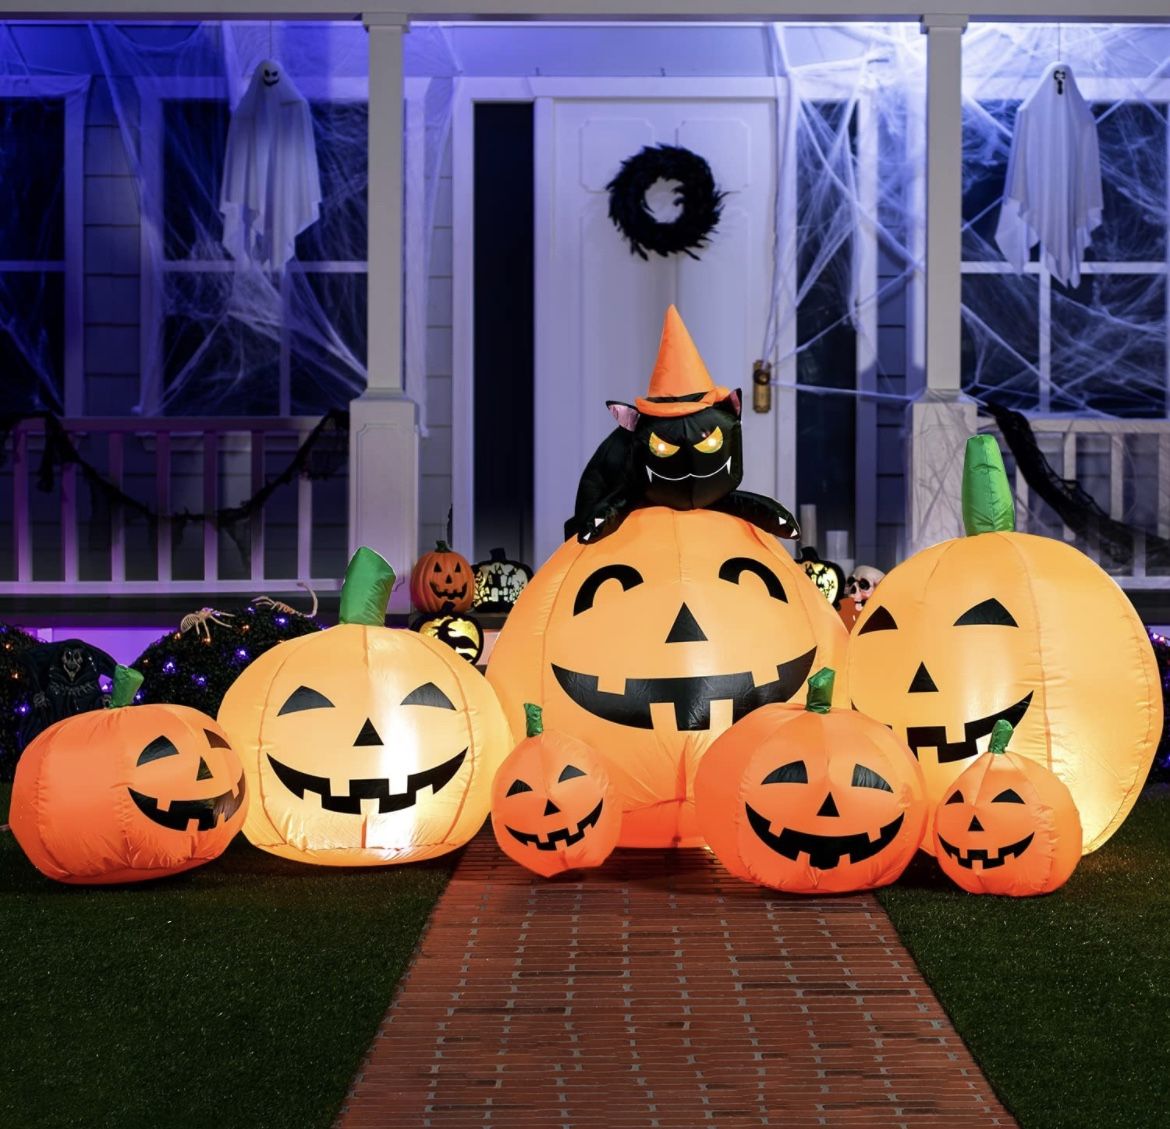 Halloween Inflatable Decoration 7 FT Long Inflatable 7 Pumpkins Patch Lanterns with Black Cat with Build-in LEDs Blow Up Inflatables for Halloween Tre